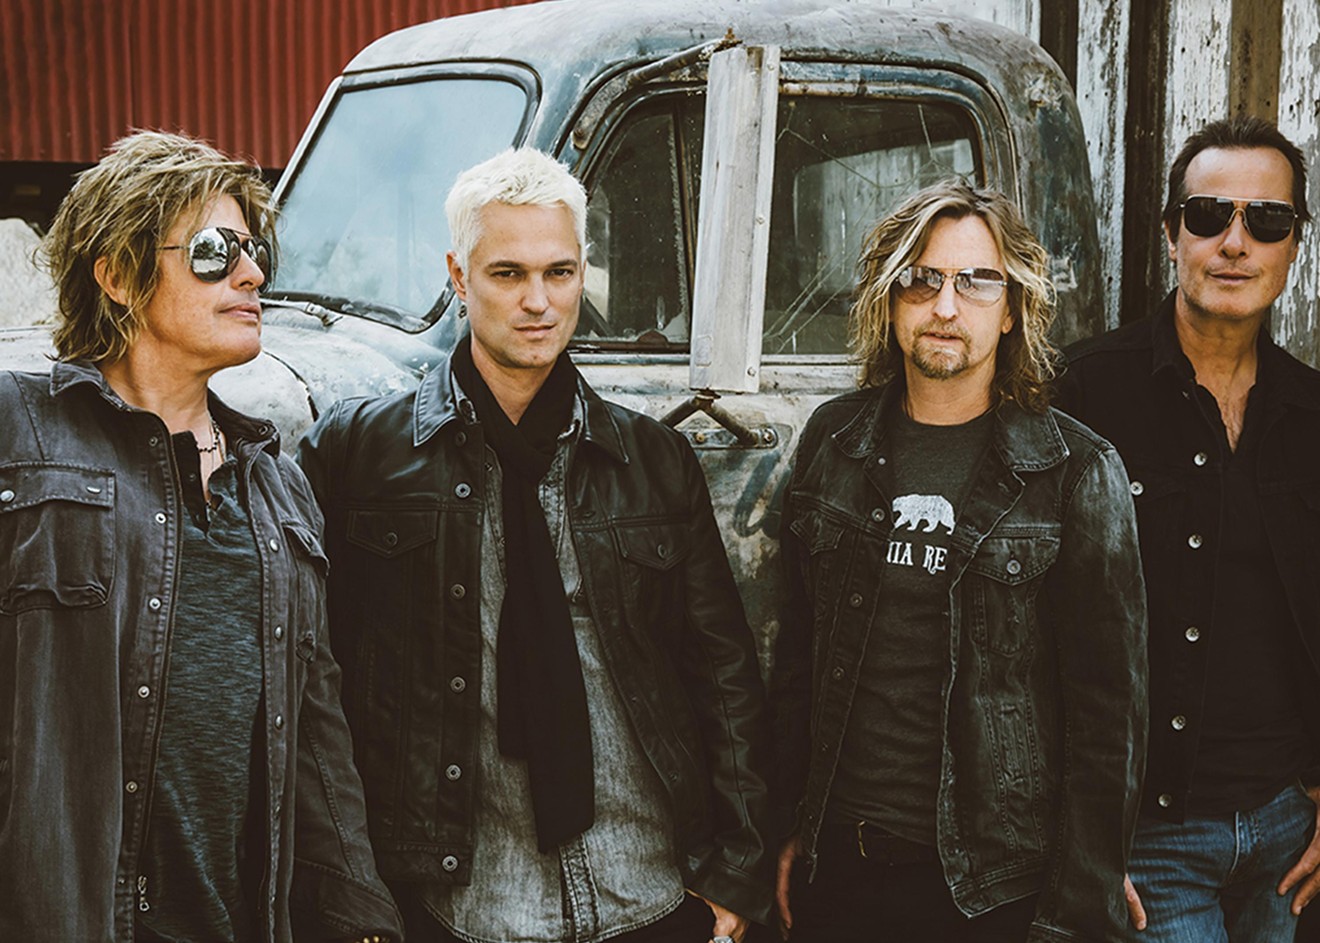 Stone Temple Pilots are coming to Phoenix.